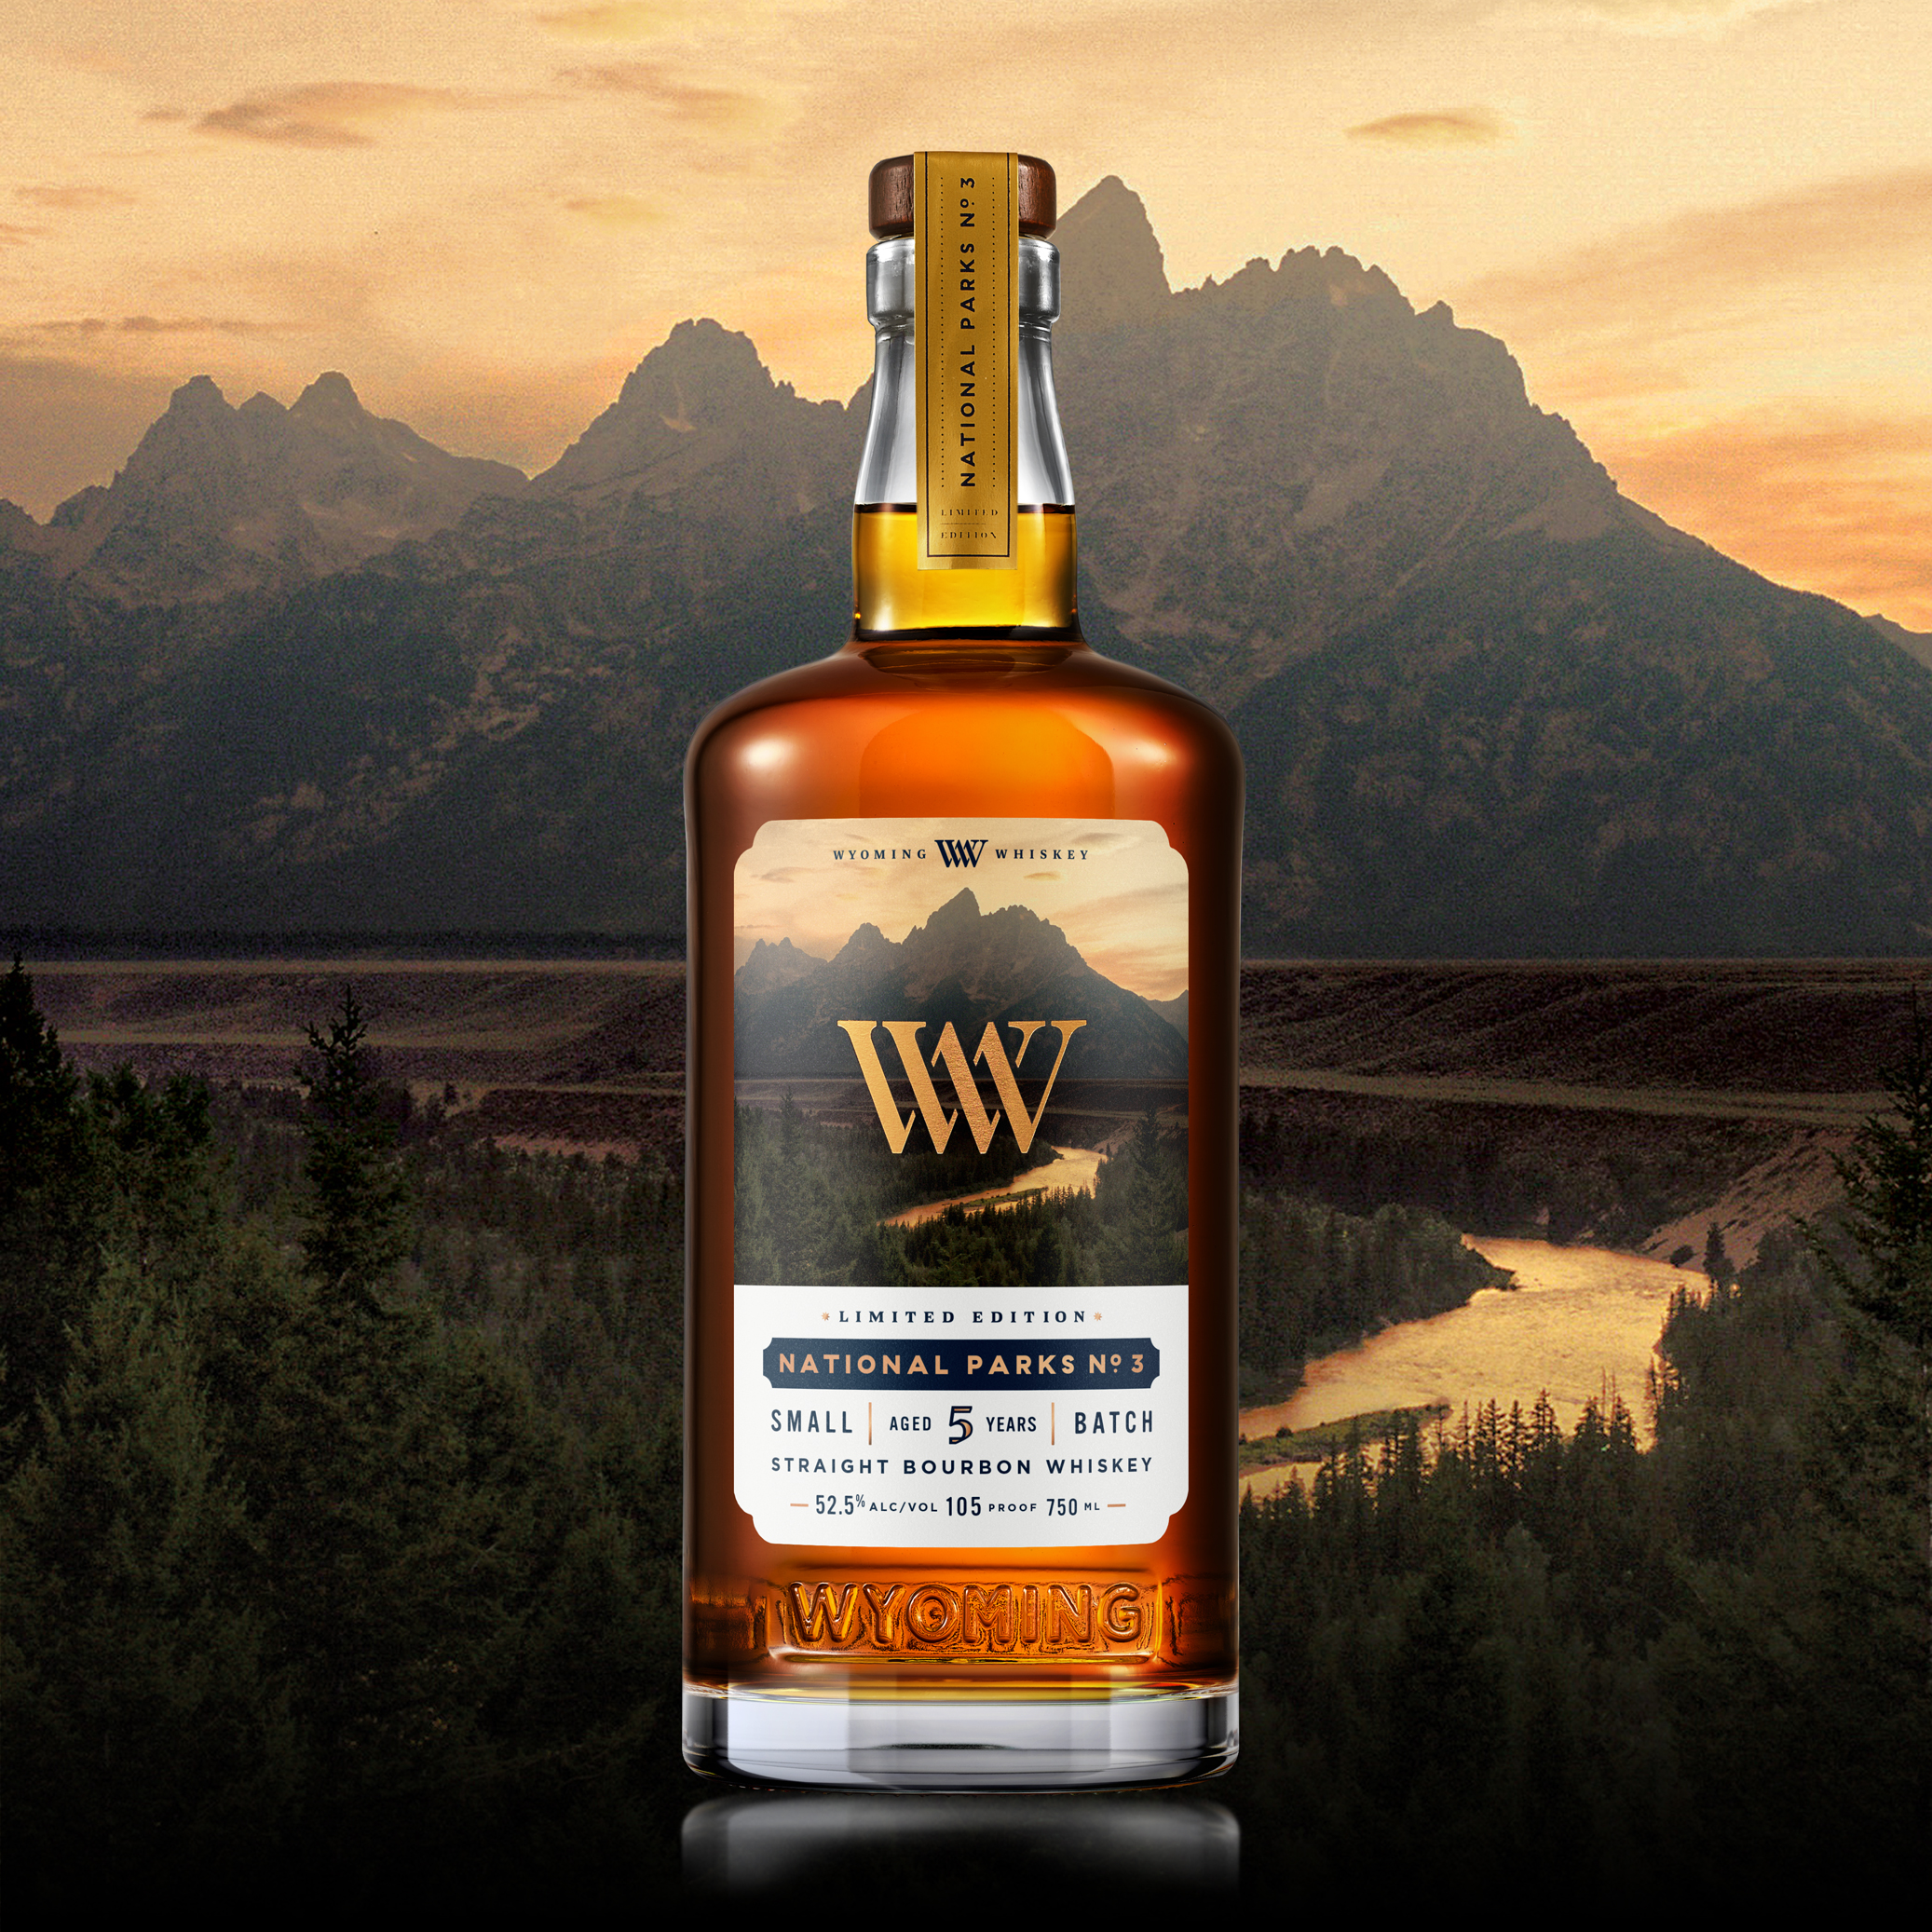 Wyoming Whiskey National Parks No. 3 & Something Special!